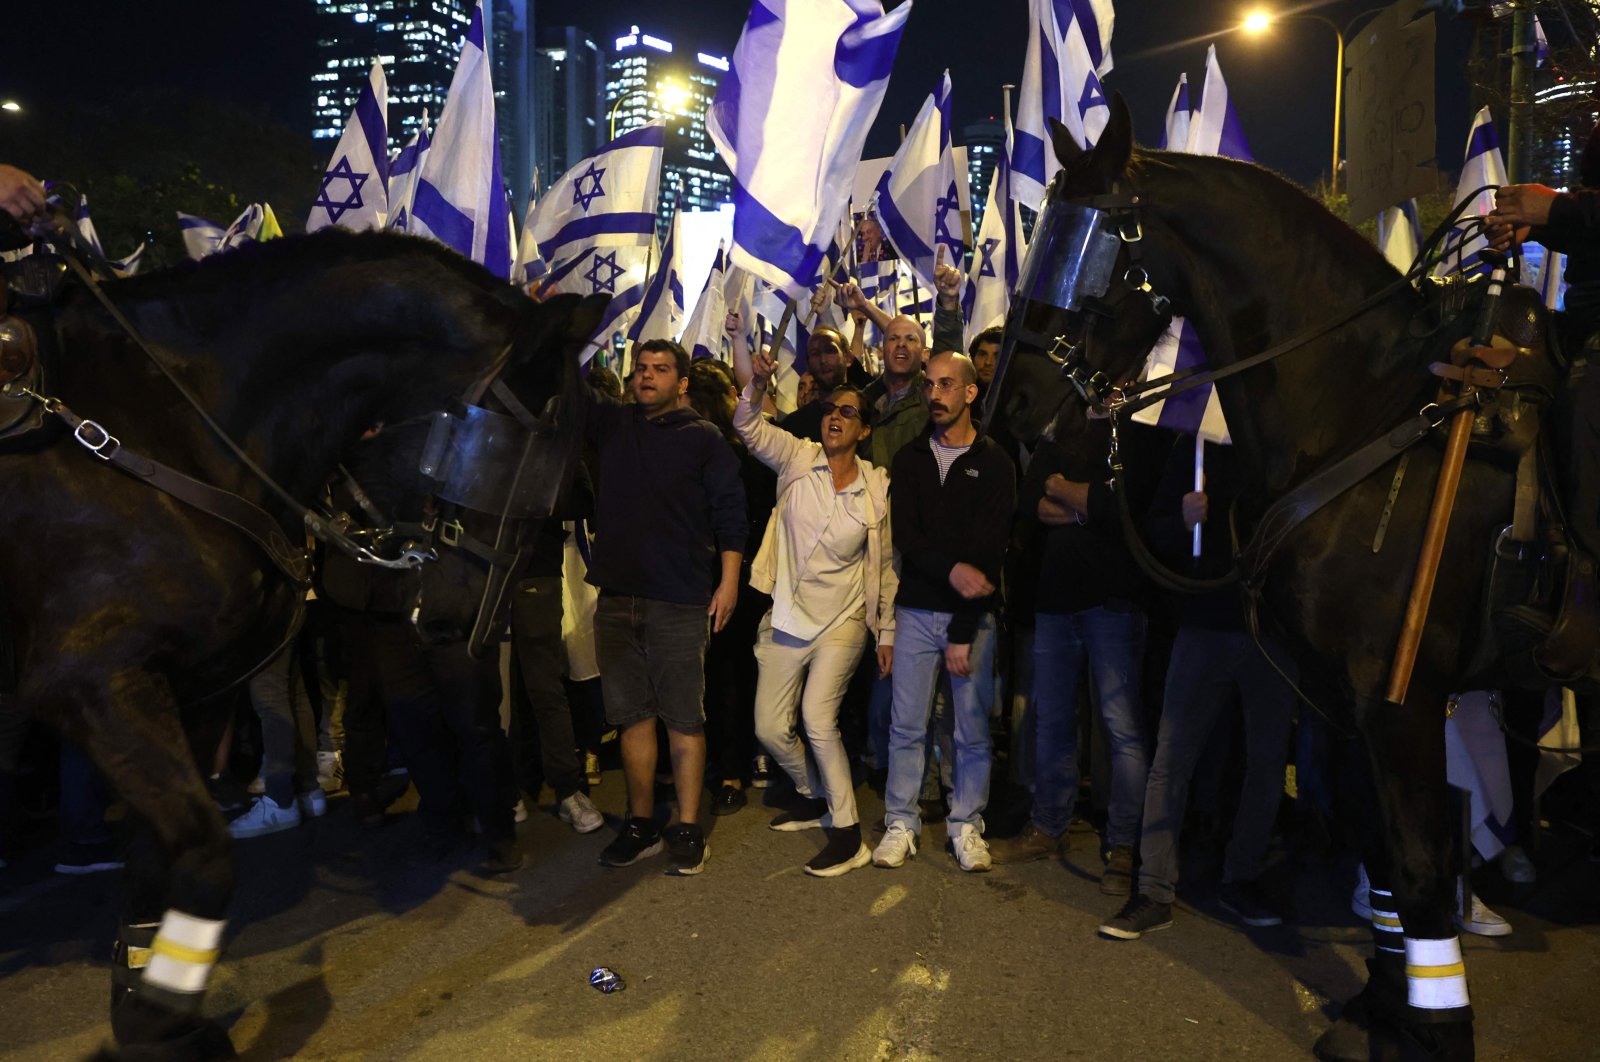 Mounted Israeli police stand guard as protesters attend a gathering in Tel Aviv, Israel, March 27, 2023. (AFP Photo)